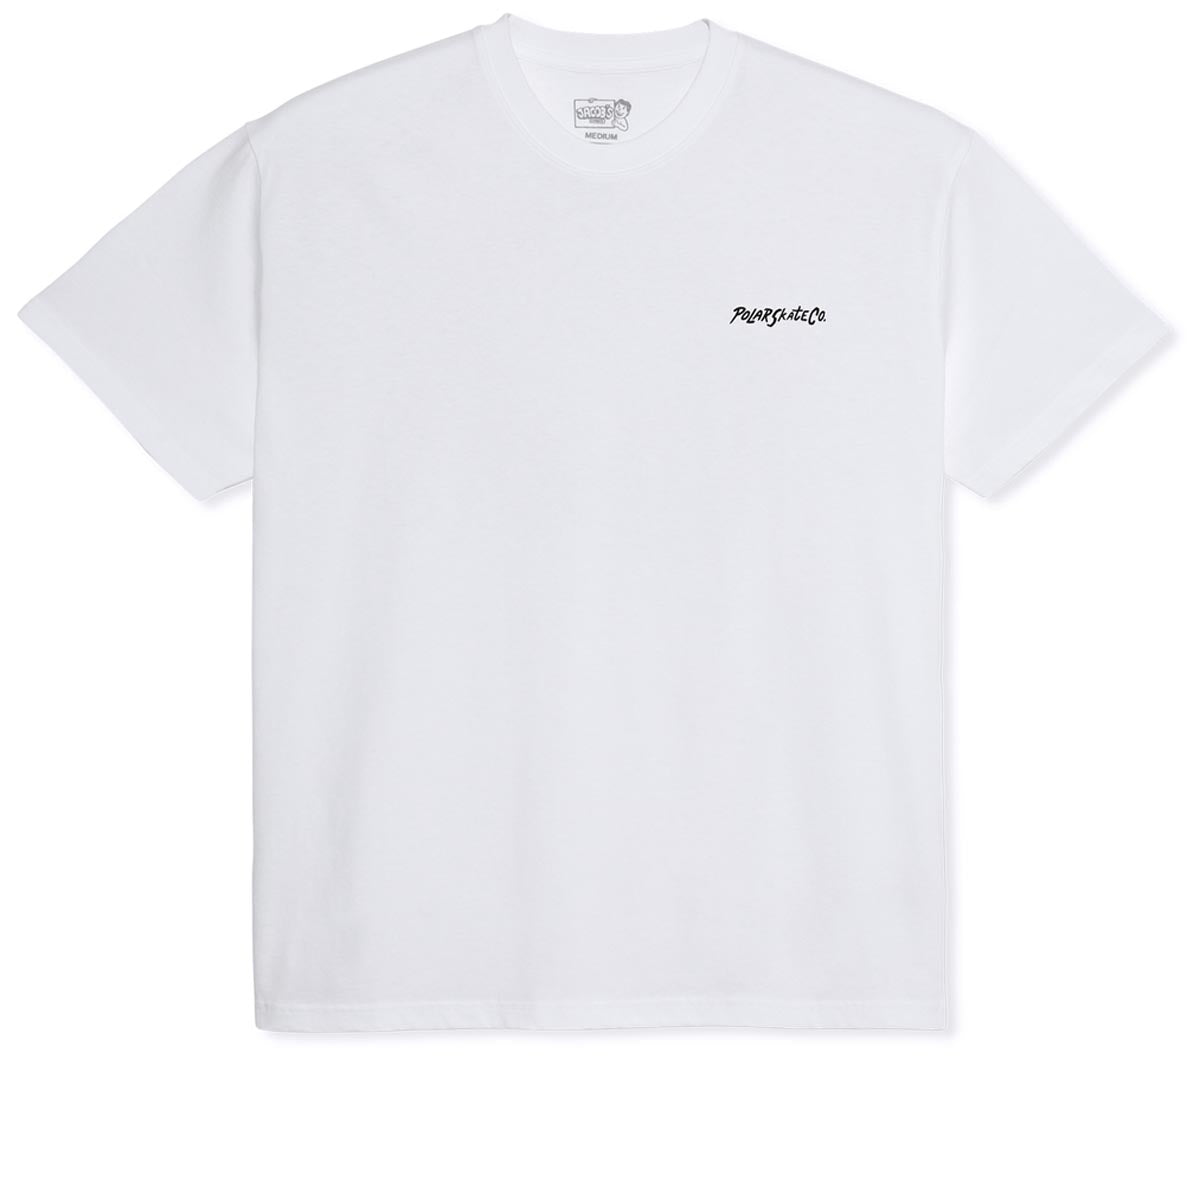 Polar Coming Out T-Shirt - White image 2